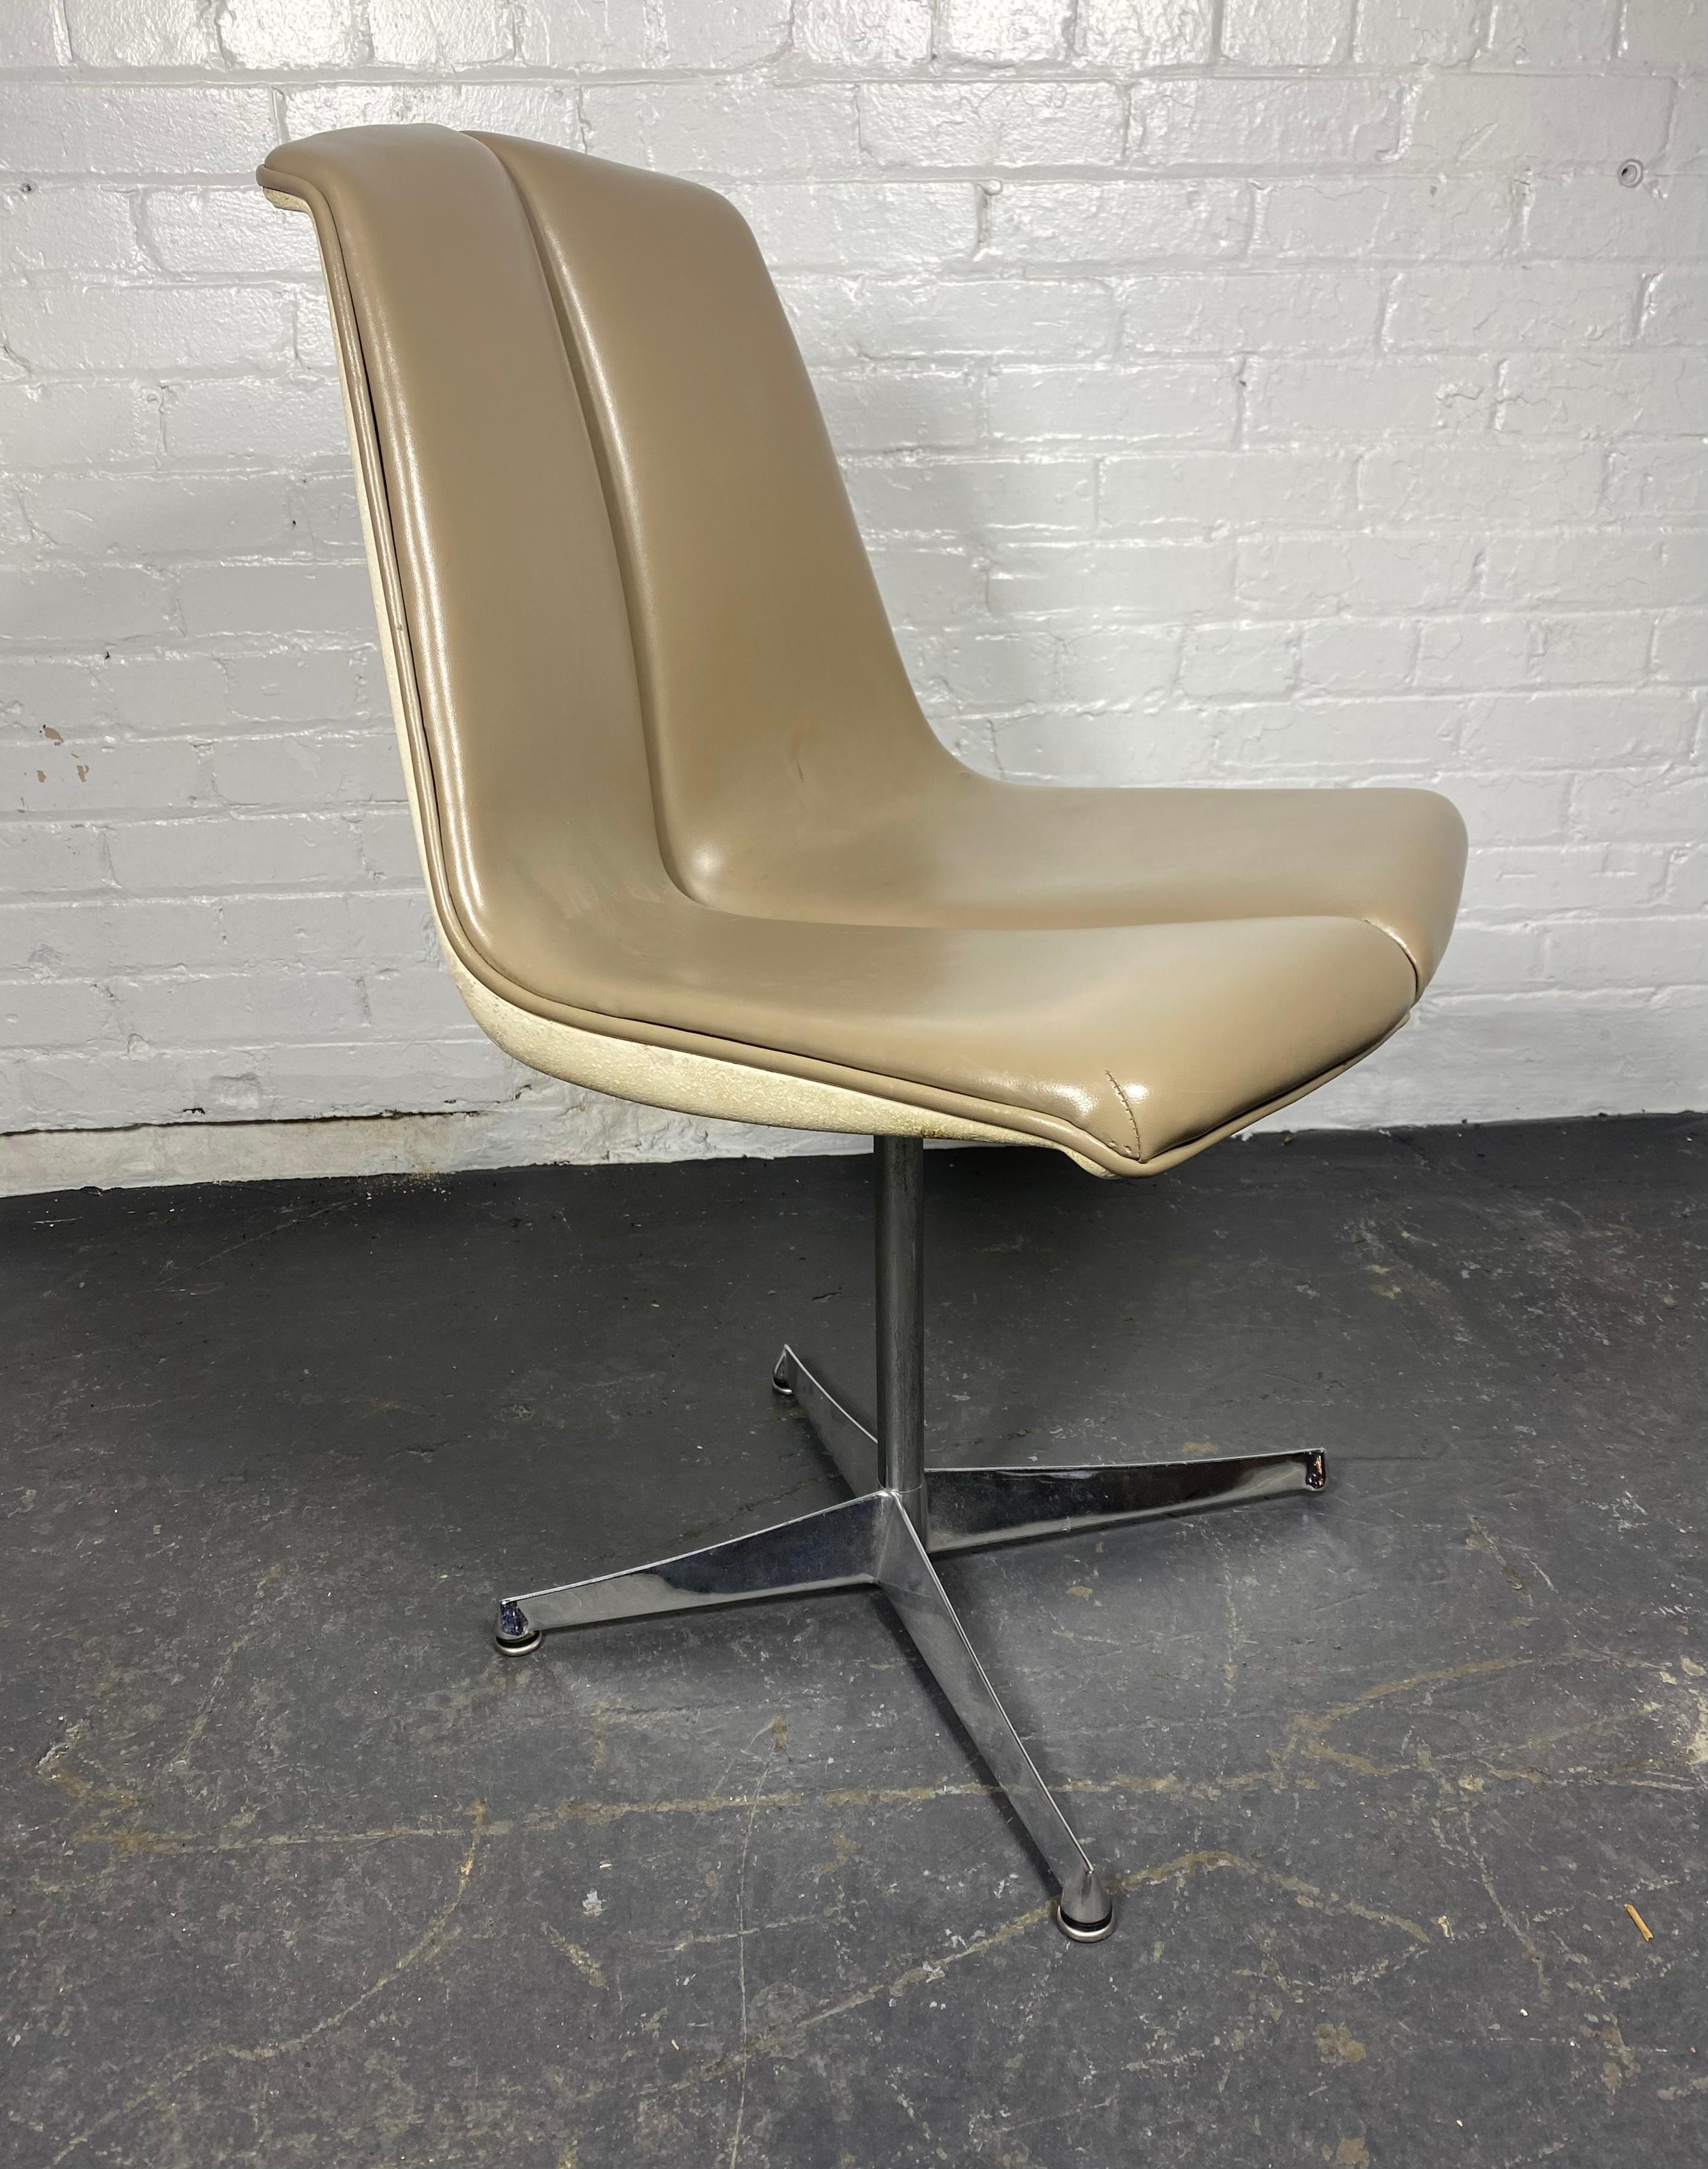 A side or desk chair designed by Richard Schultz for Knoll's Art Metal series in the 1960s. Original grey / beige vinyl upholstery with a four star aluminum swivel base.Retains original early Knoll label.. Great example of modernist design.